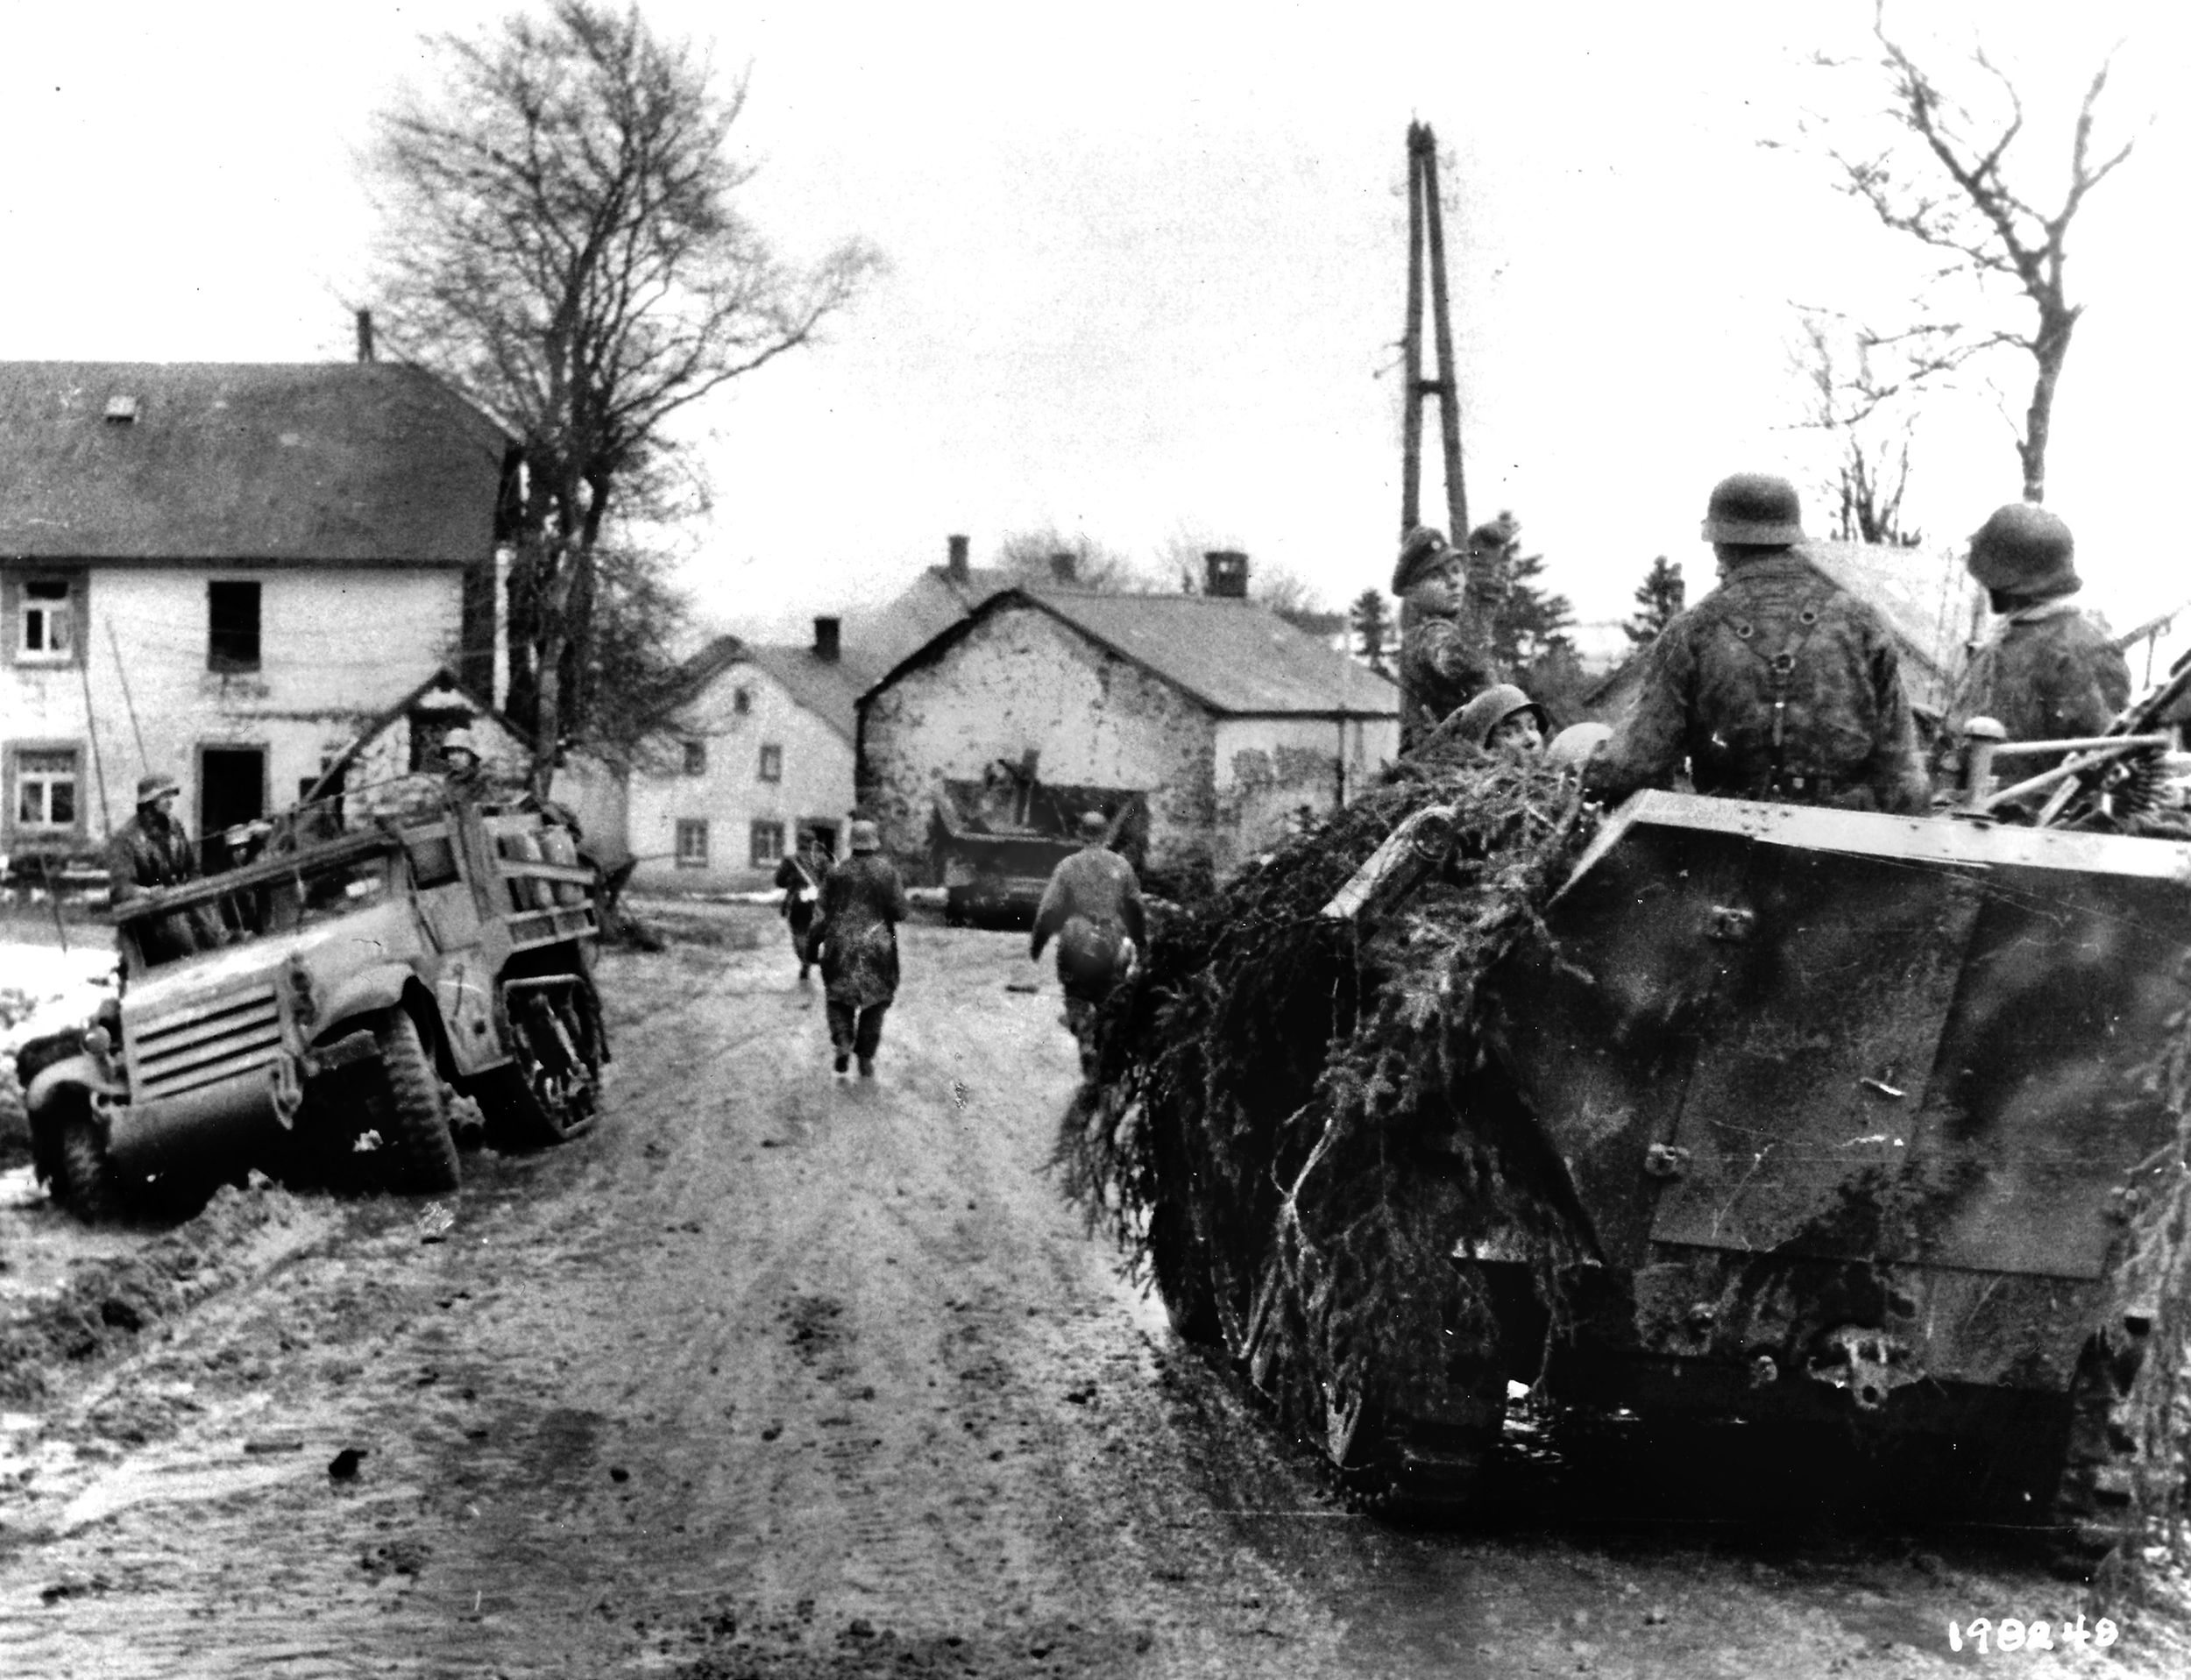 German infantrymen, on foot and riding in a halftrack, proceed through a village their forces have recently occupied. At left, German soldiers inspect an abandoned American M3 halftrack.